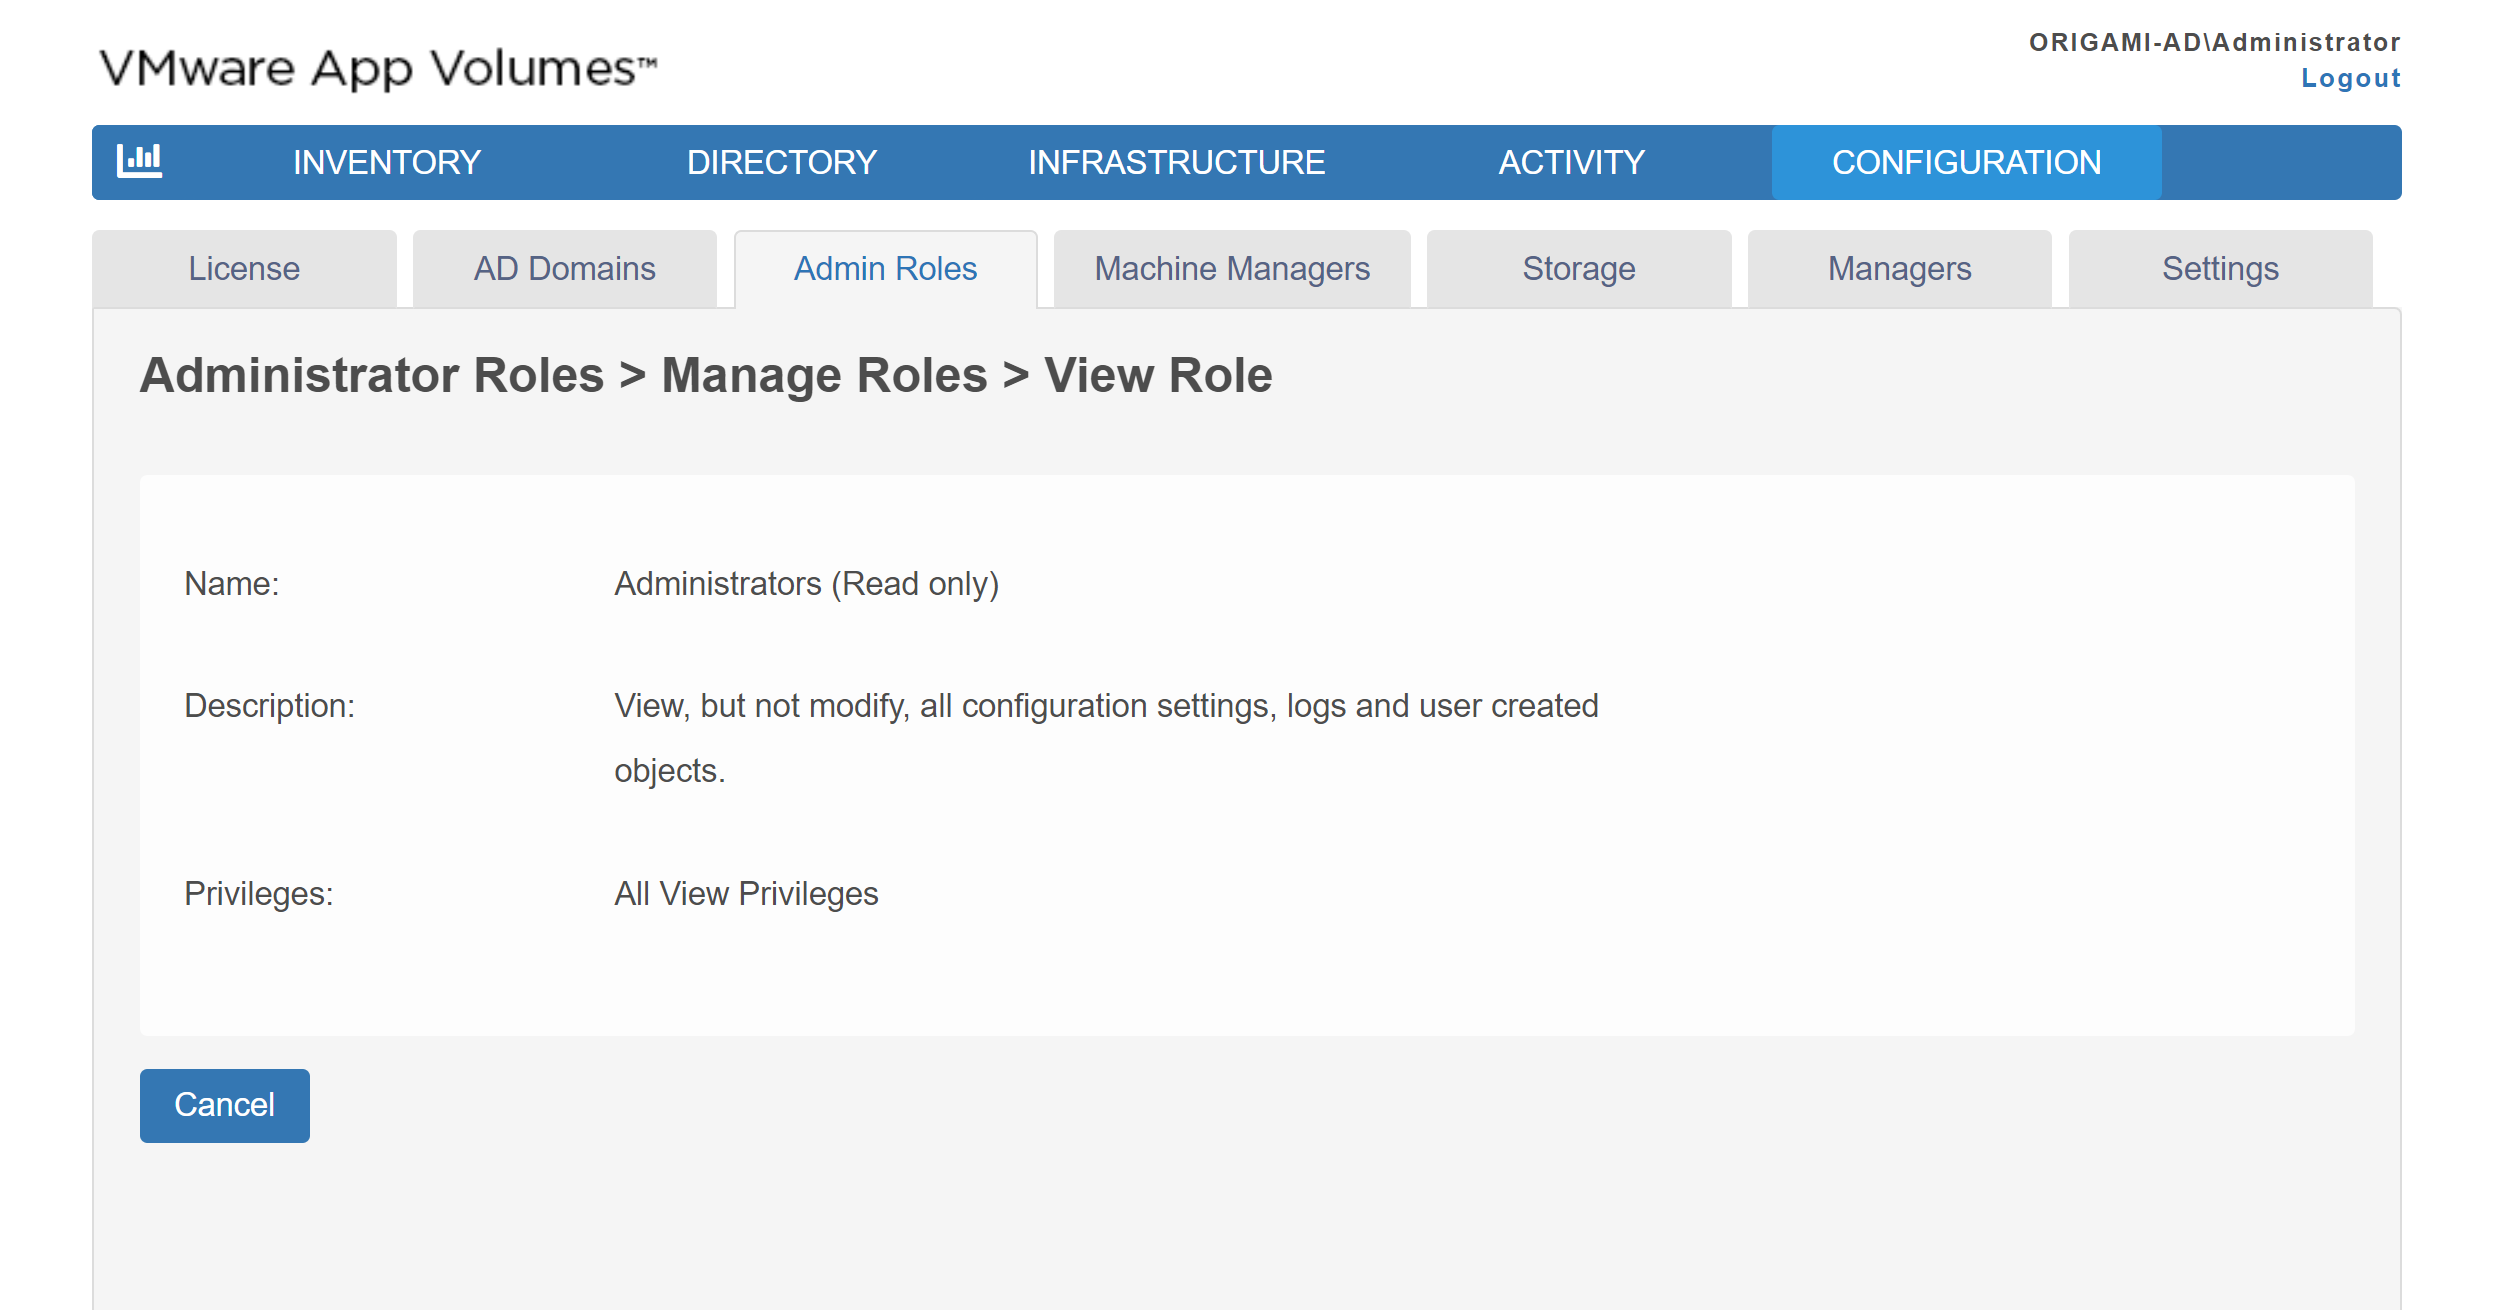 Name, Description, and Privileges of an App Volumes admin role are displayed.